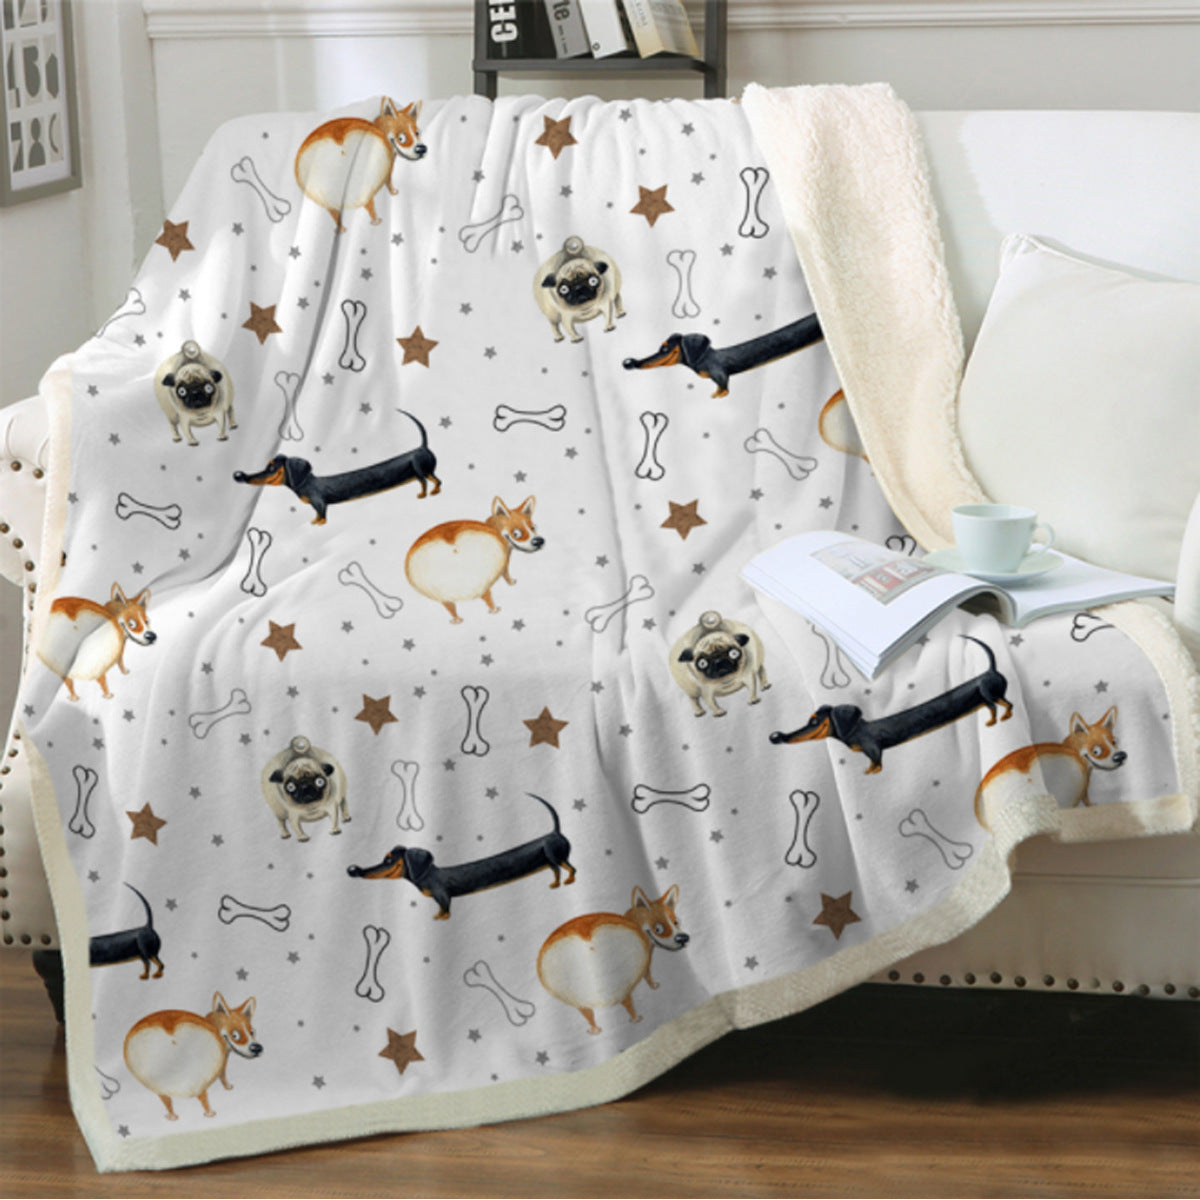 Cute Dog Print Fleece Blankets for Christmas-Blankets-1-9-40*60 inches-Free Shipping at meselling99